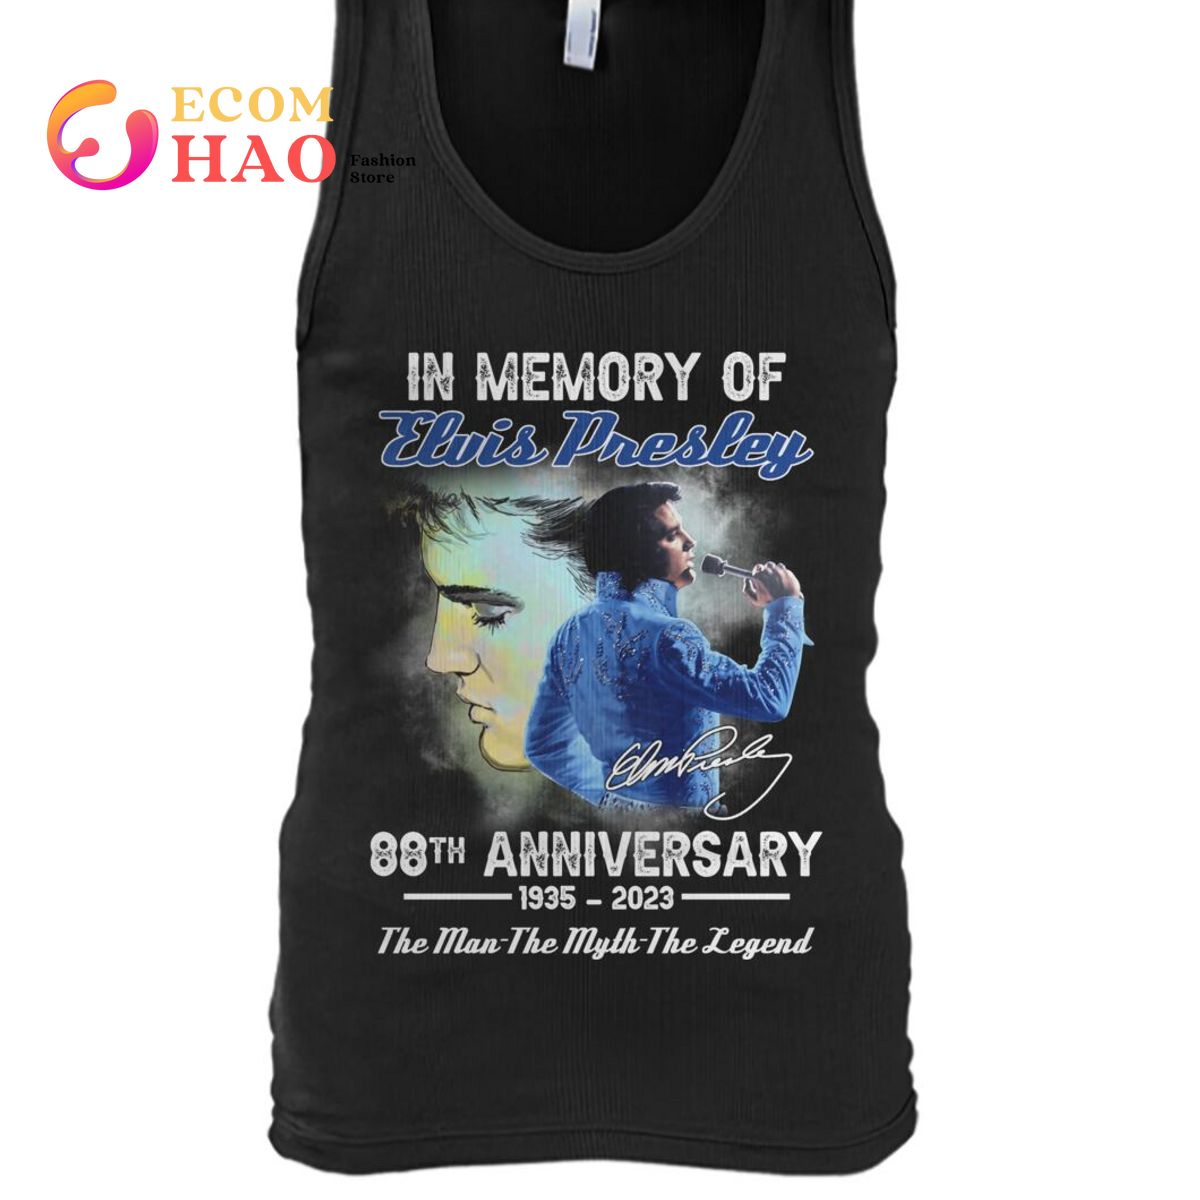 In Memory Of Elvis Presley 88th Annversary 1935-2023 The Man The Myth The Legend T-Shirt